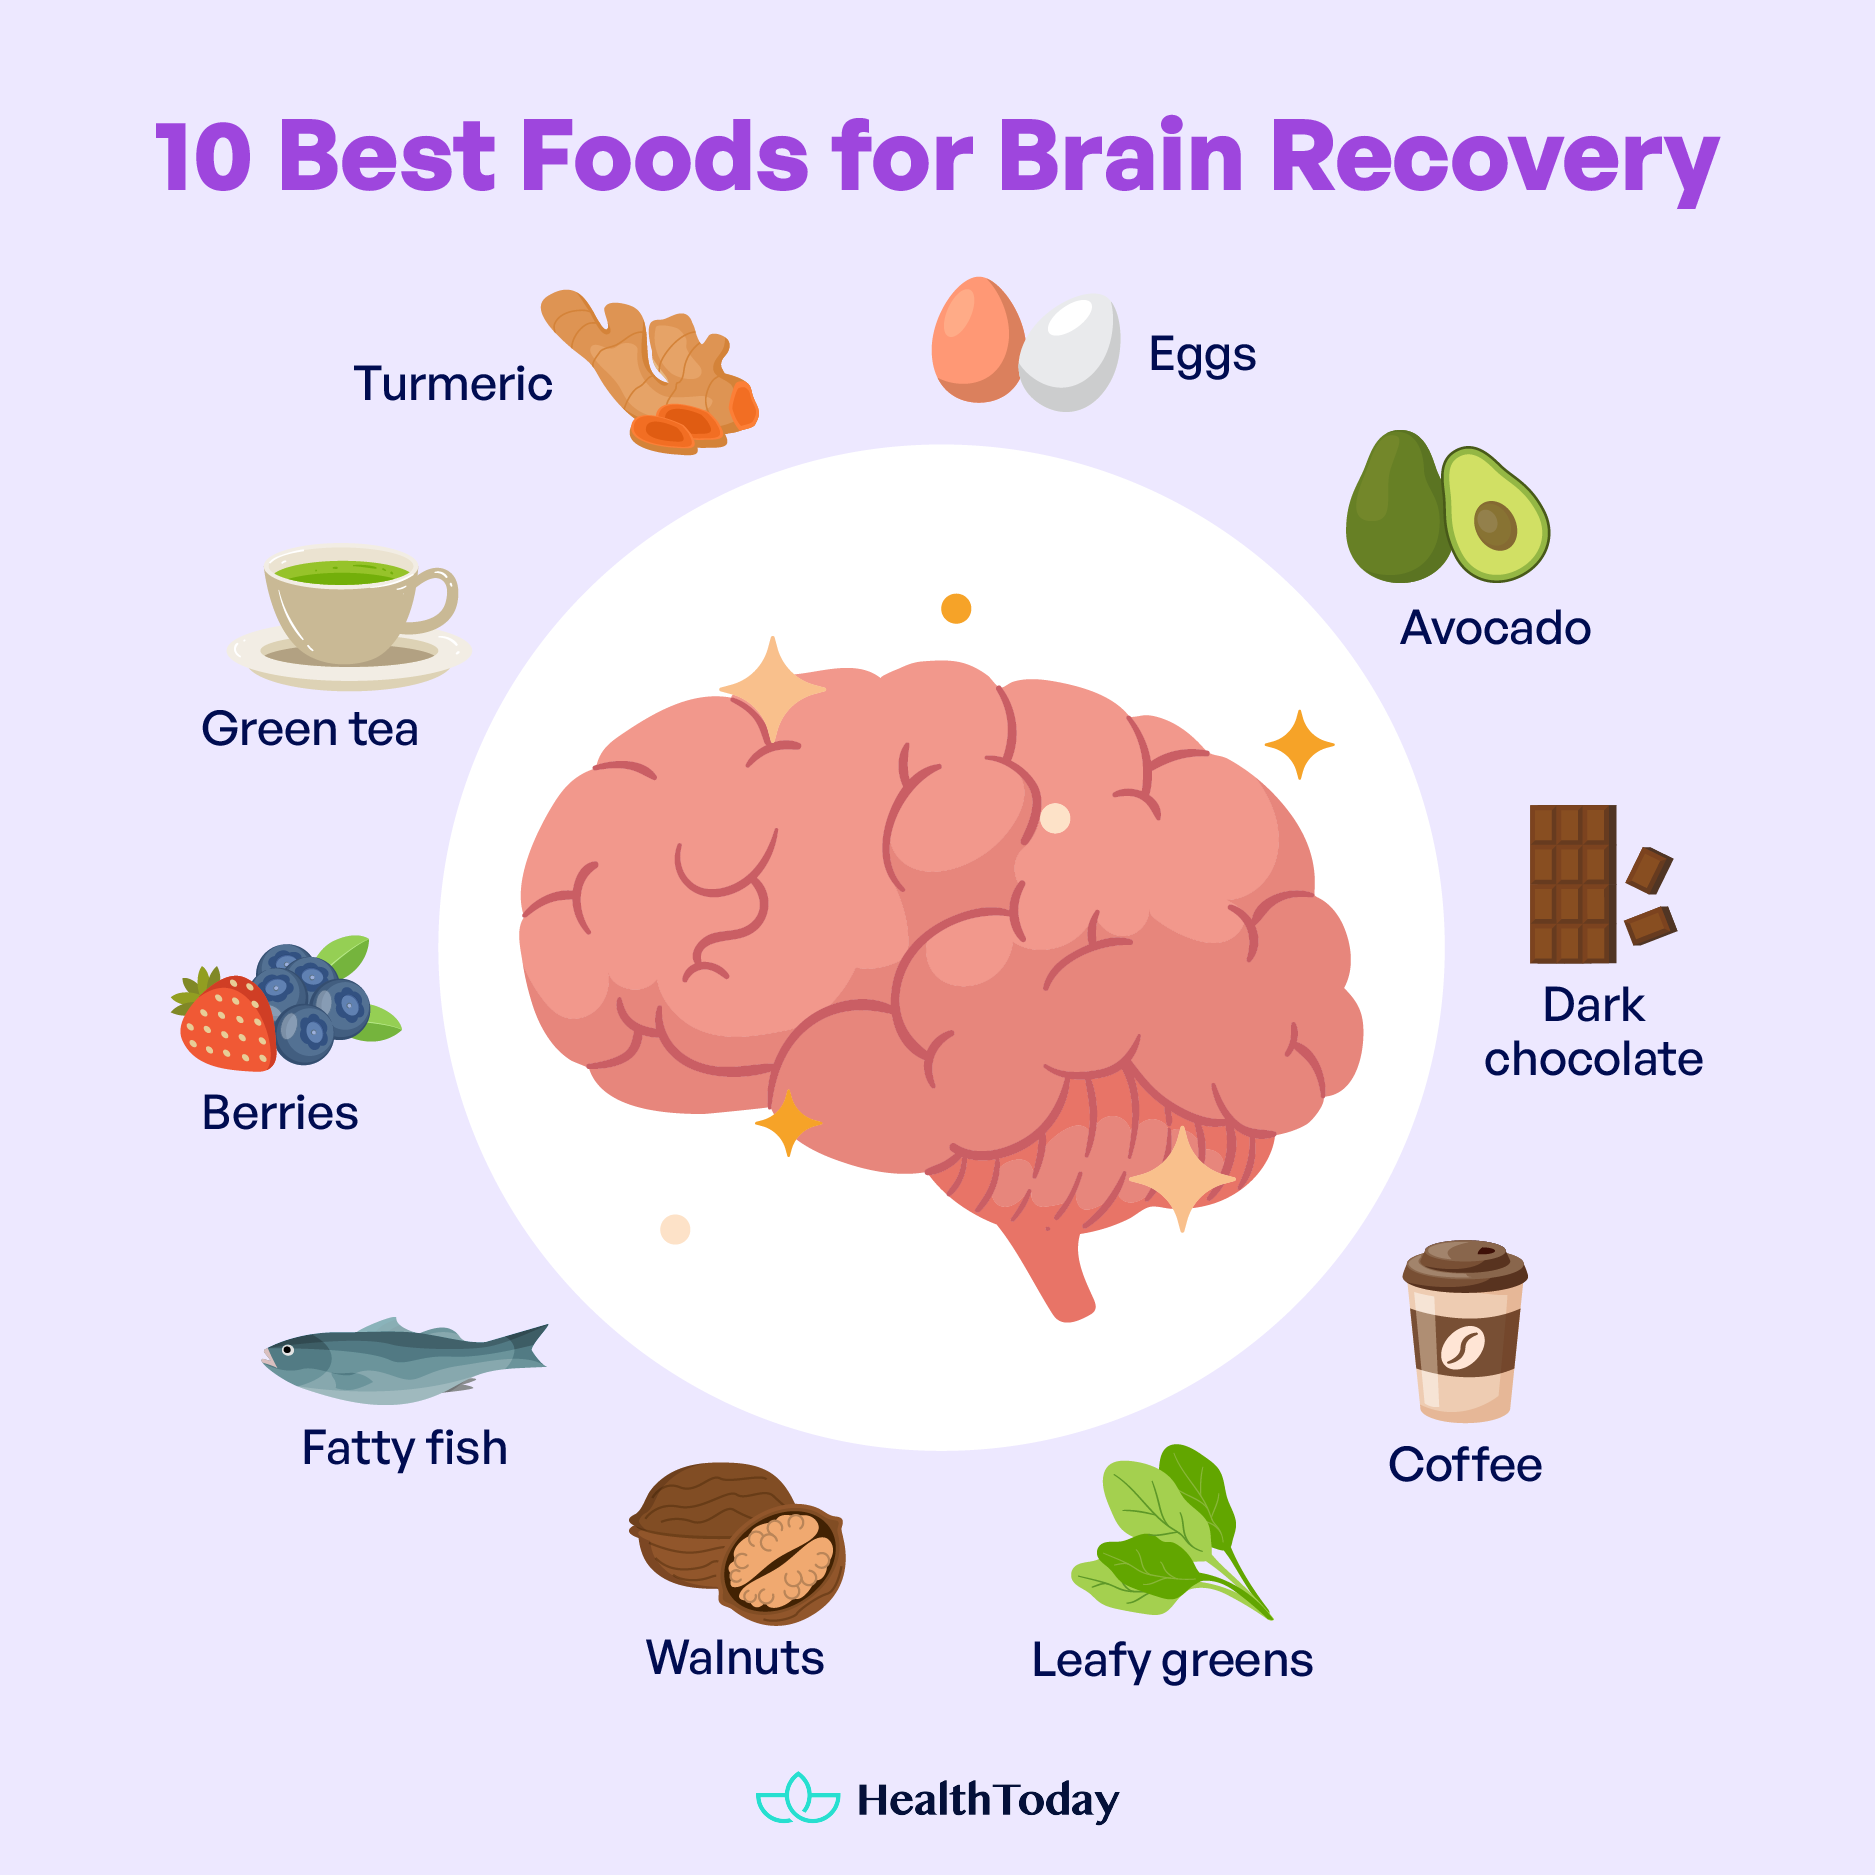 10 best foods for brain recovery